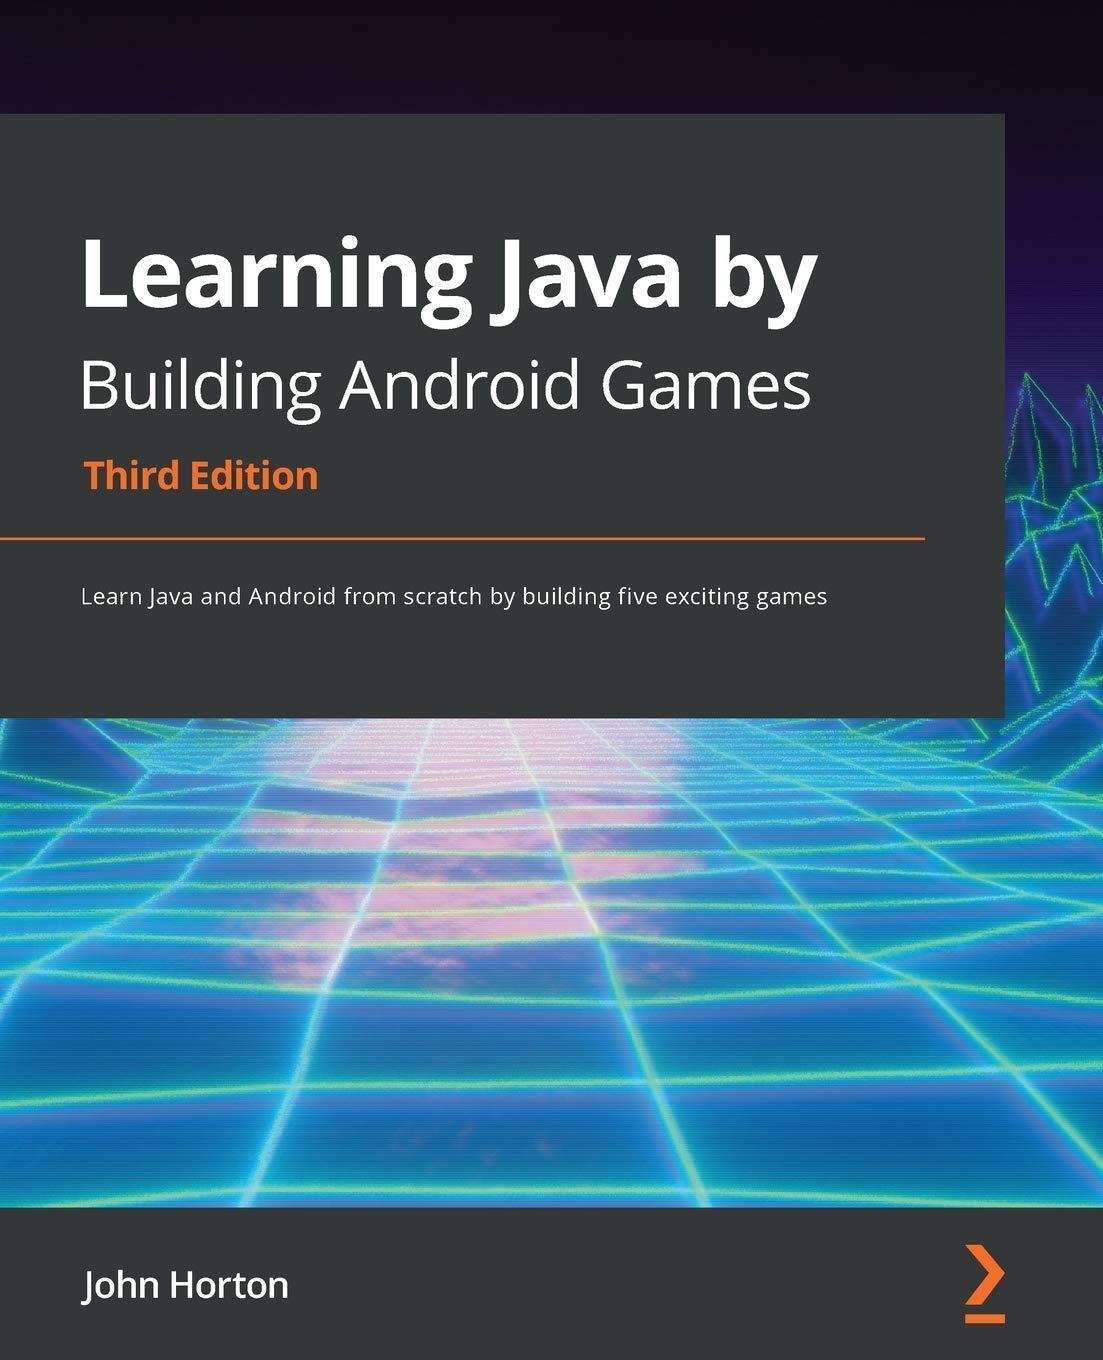 learning java by building android games 3rd edition john horton 1800565860, 9781800565869